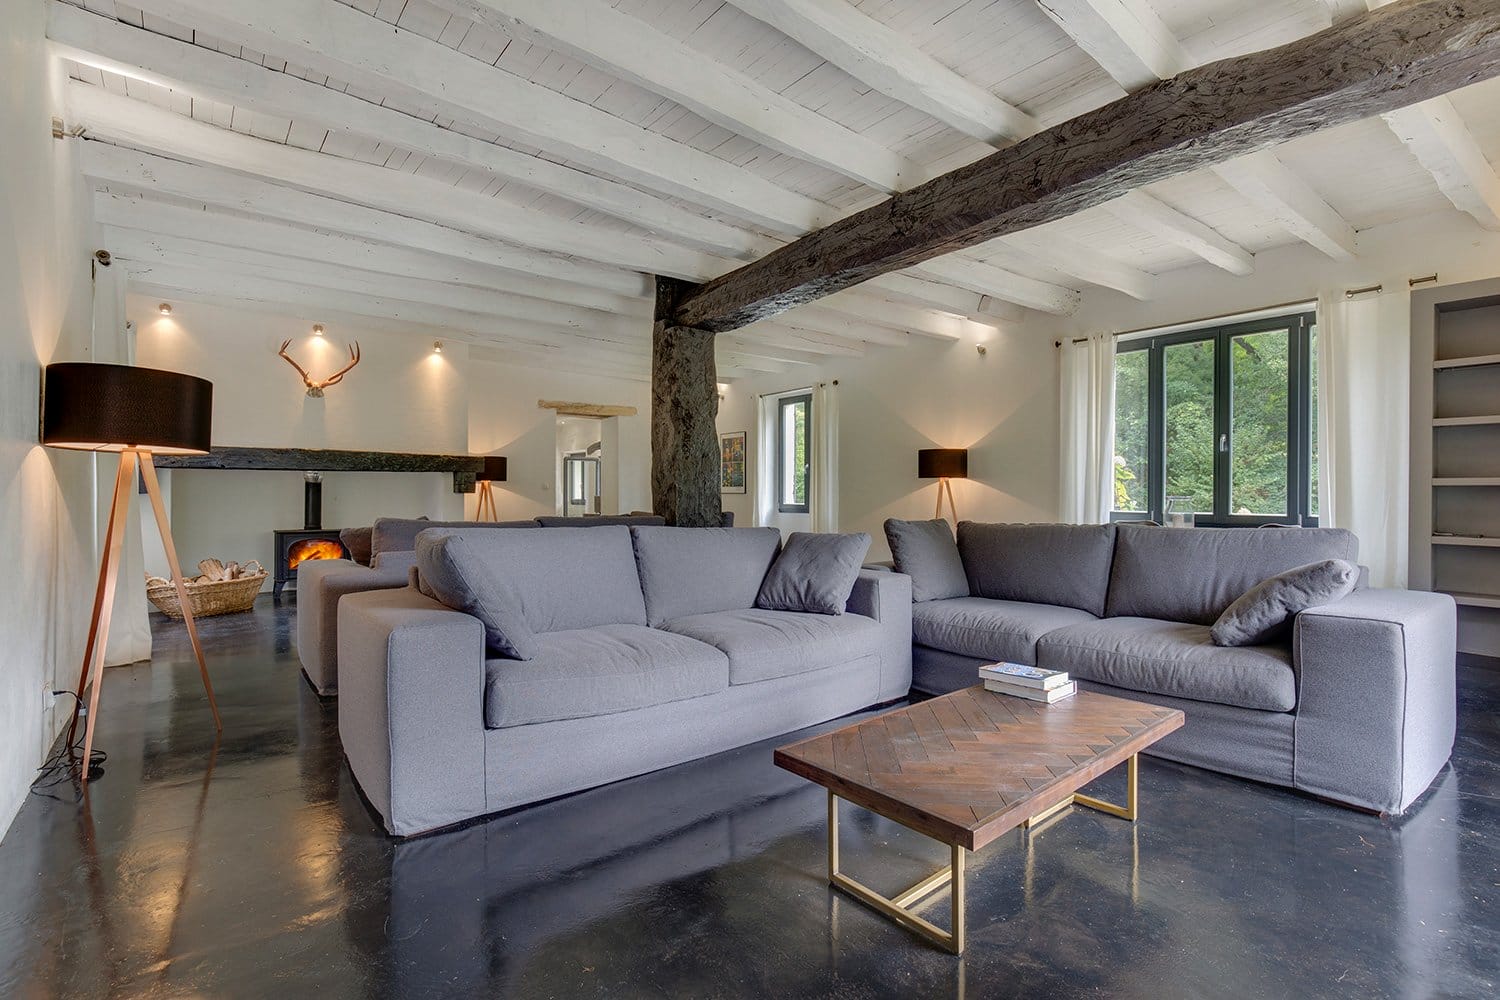 Stunning gite lounge with exposed beams